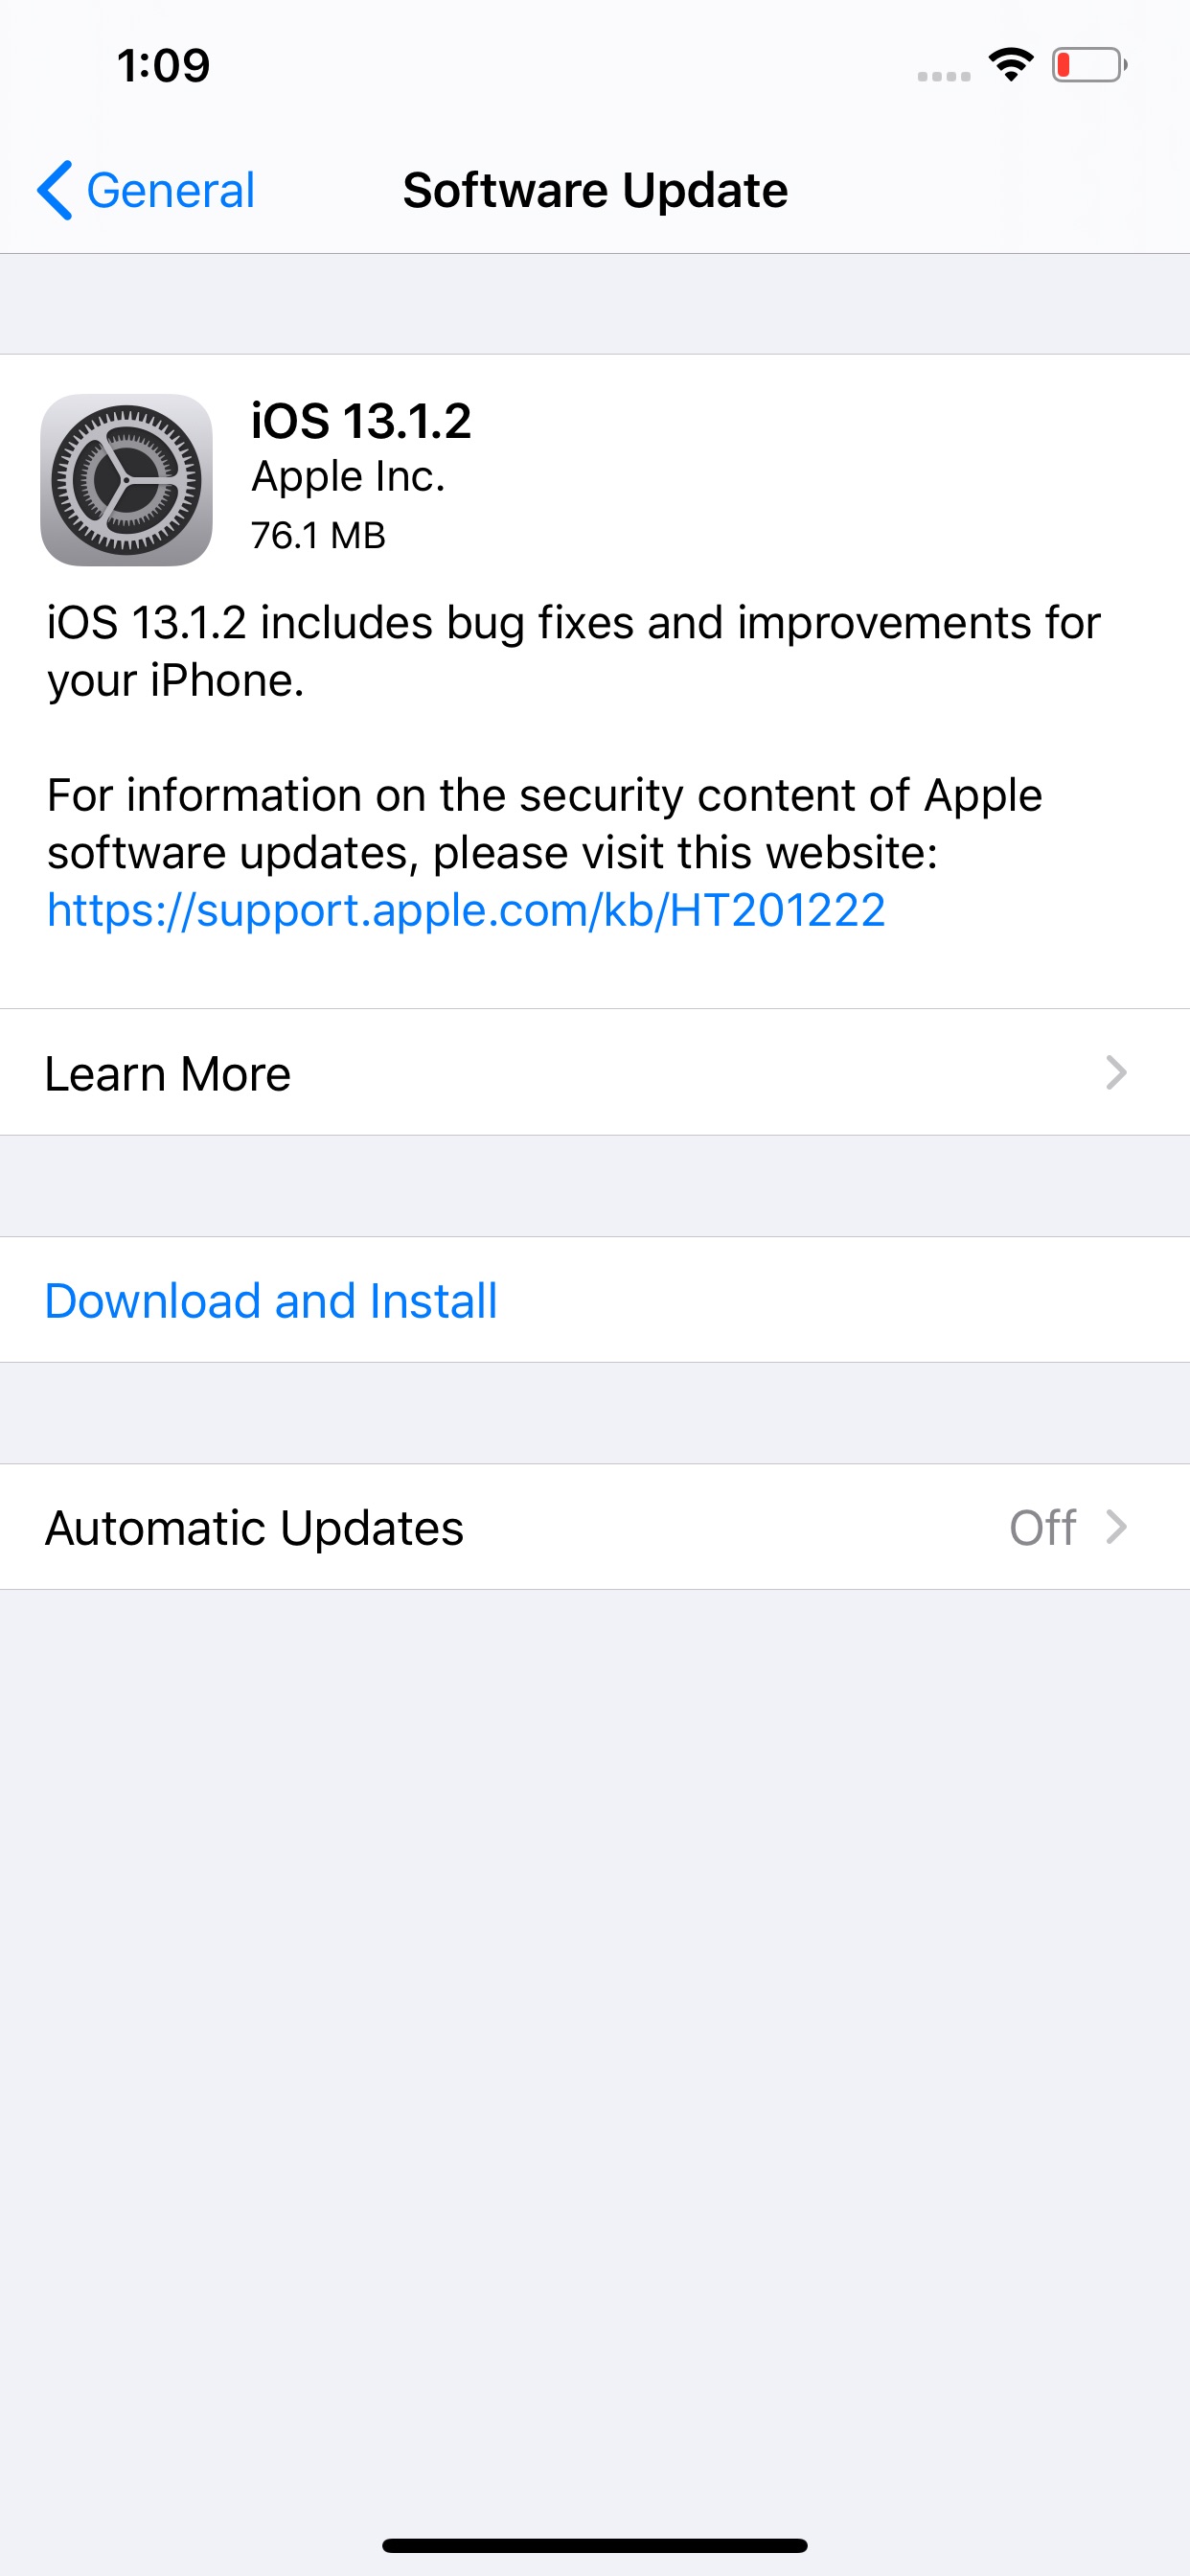 Apple Releases iOS 13.1.2 to Fix Bugs With Camera, iCloud Backup, Flashlight, More